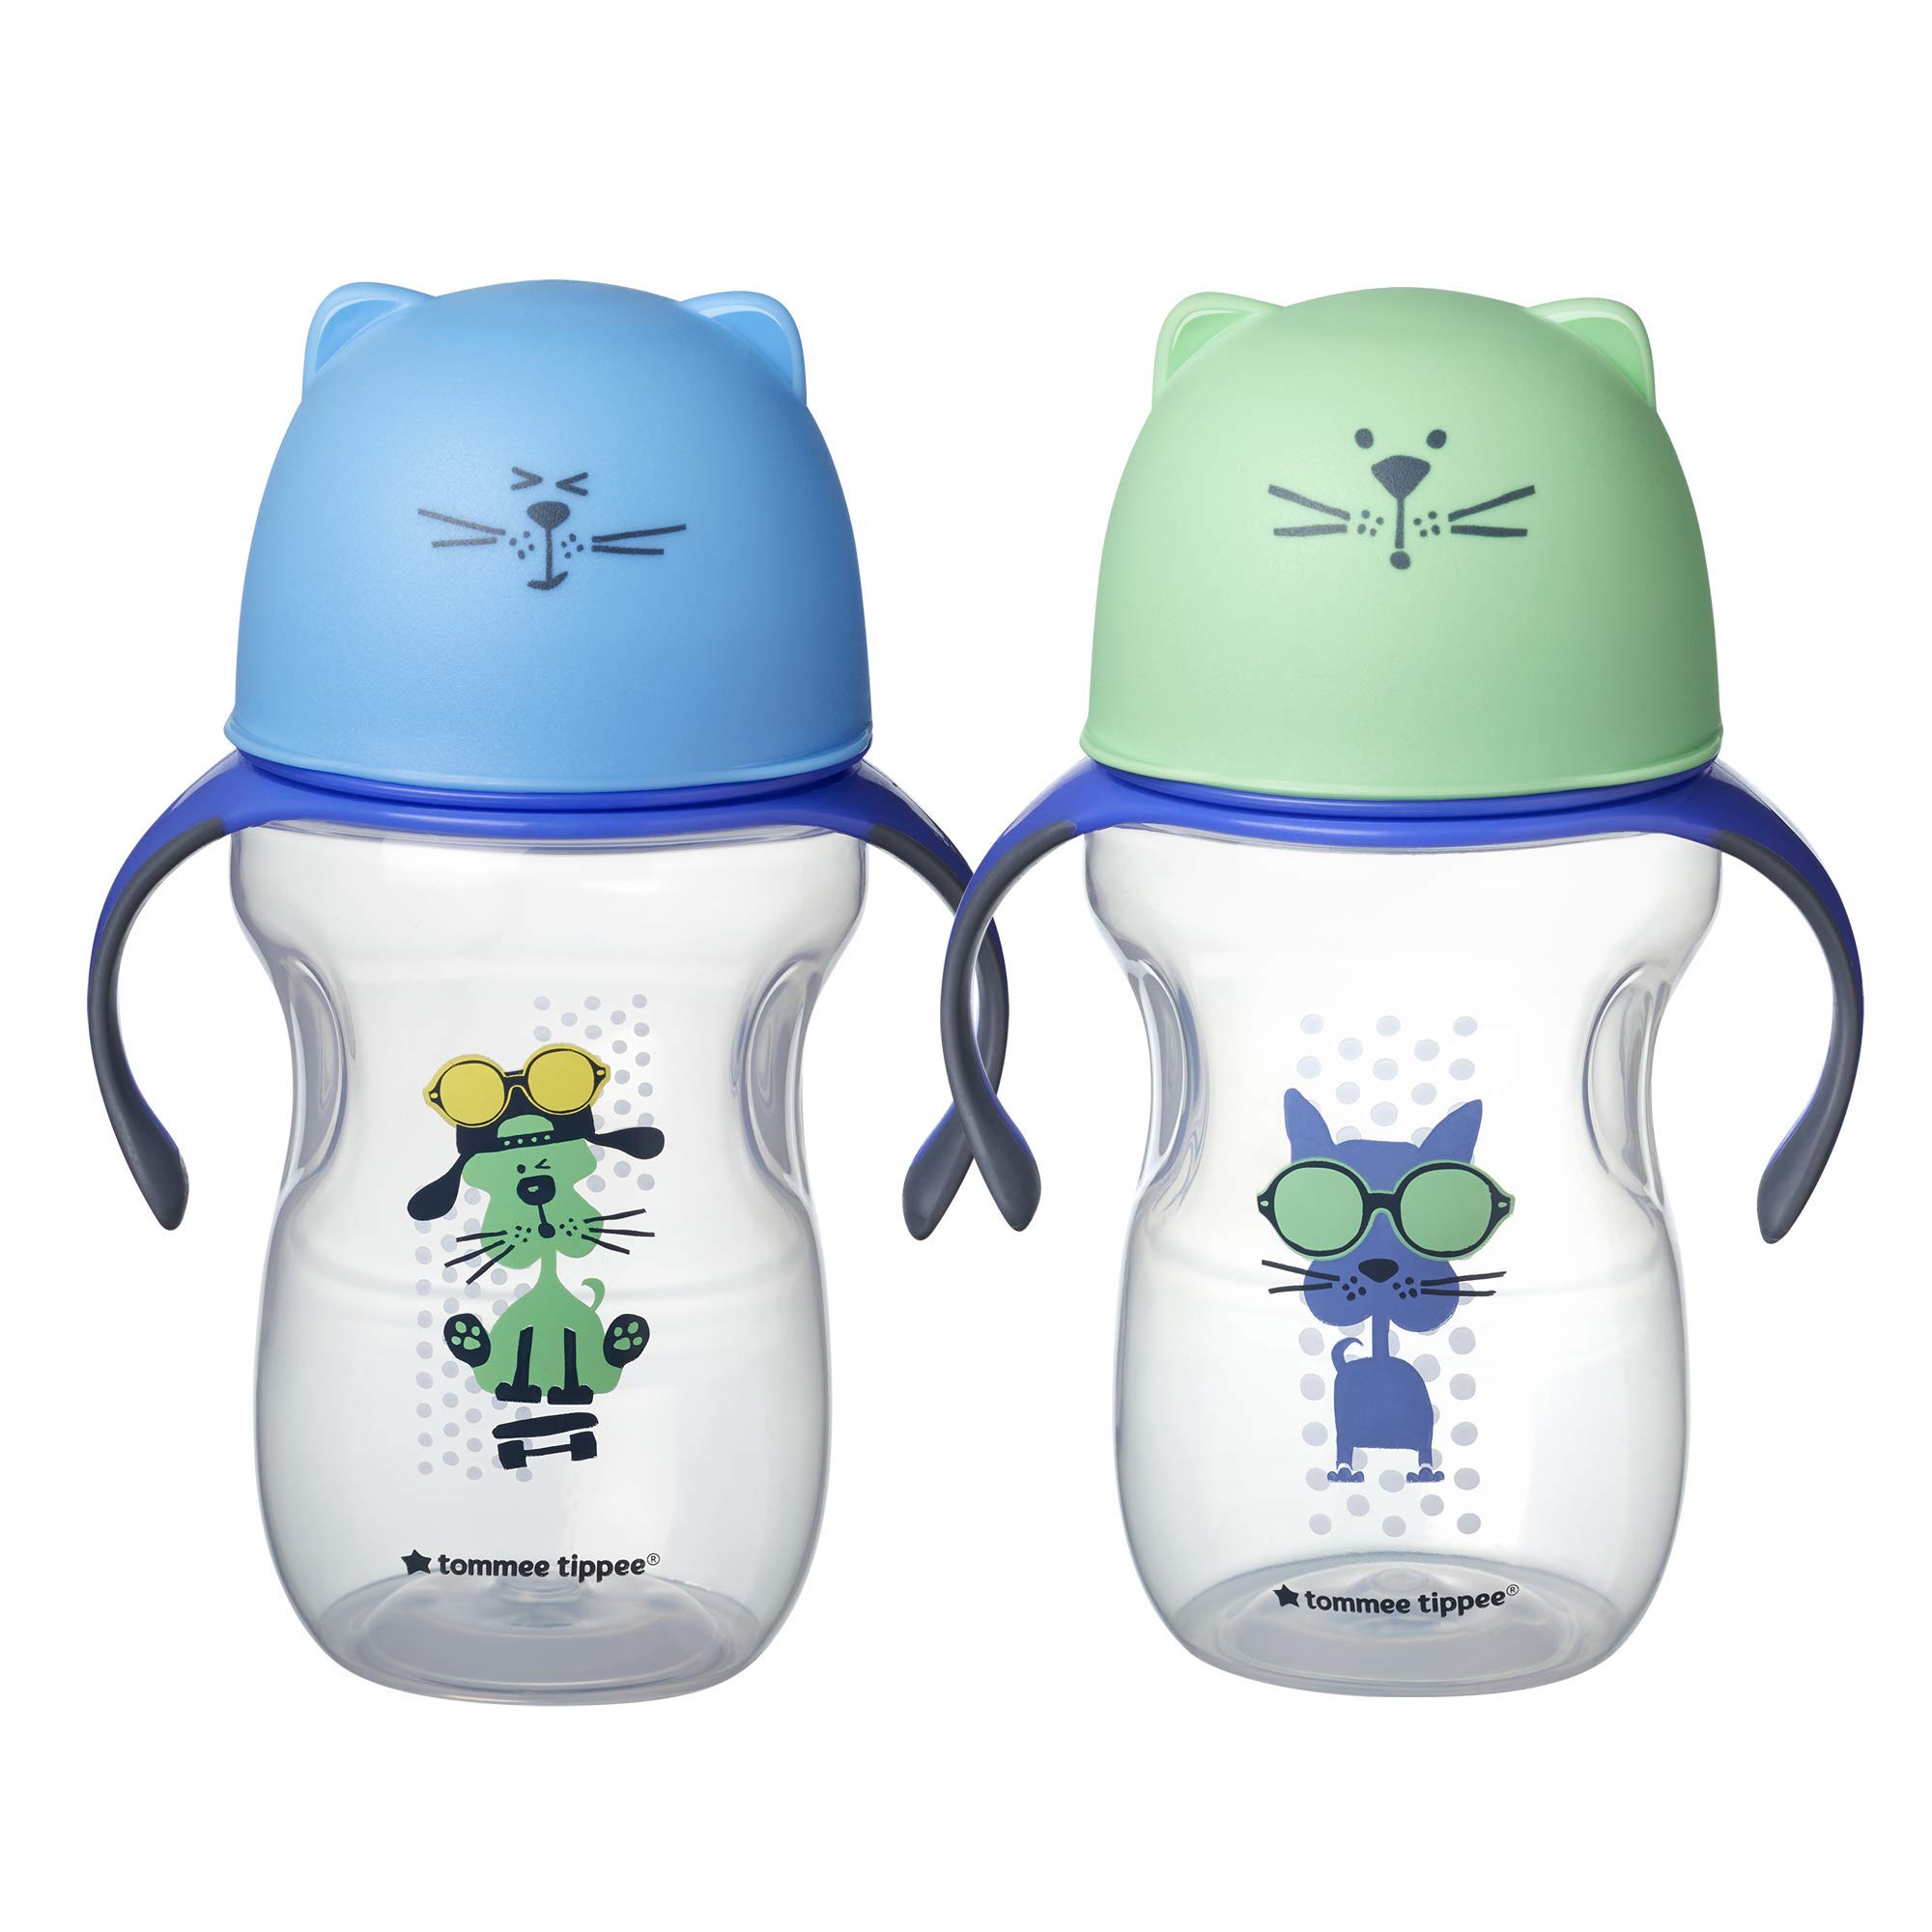 Tommee Tippee Toddler Sippee Cup, Boy – 9+ months, 3pk 